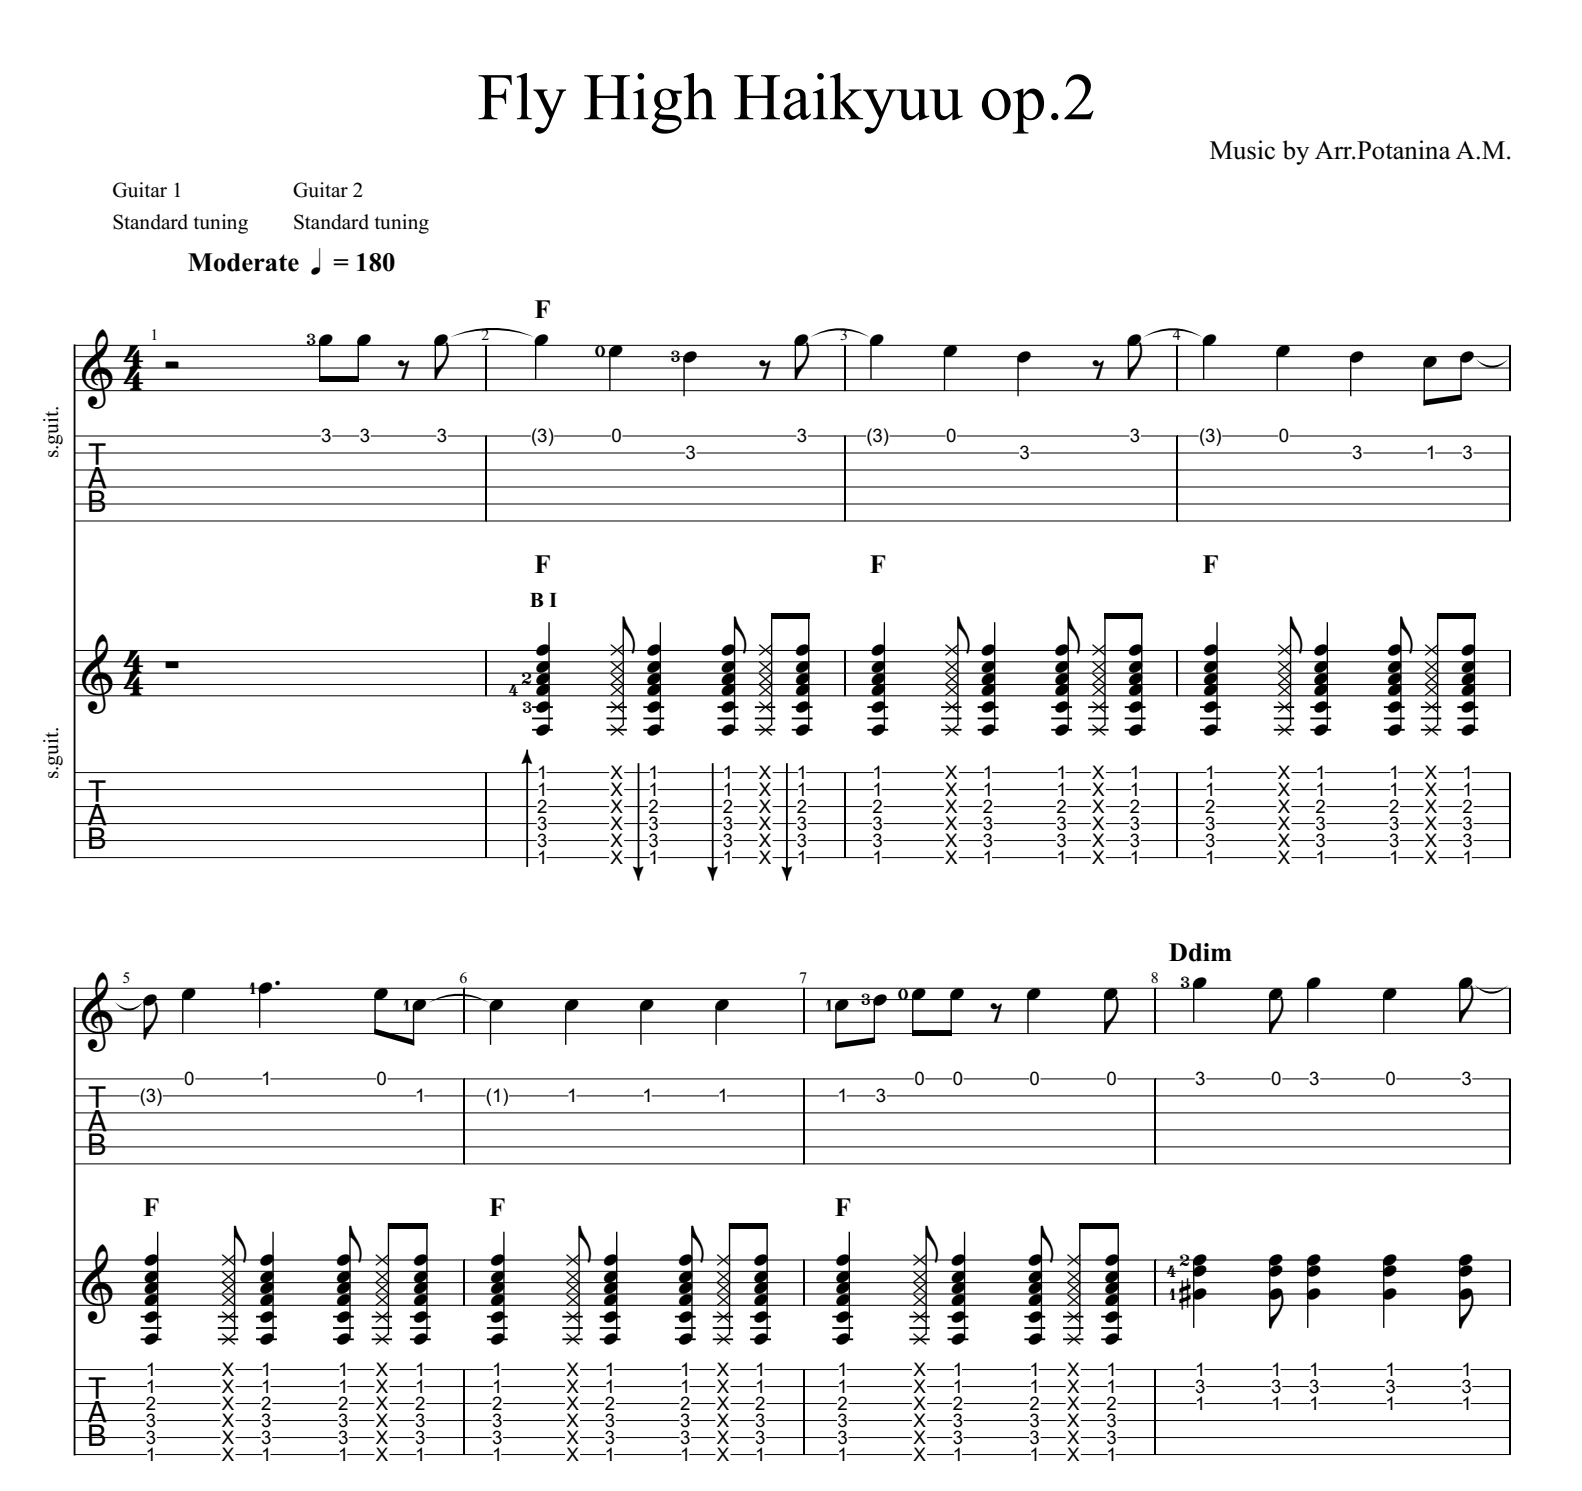 Haikyuu!! Opening 5 Sheet music for Flute (Solo)